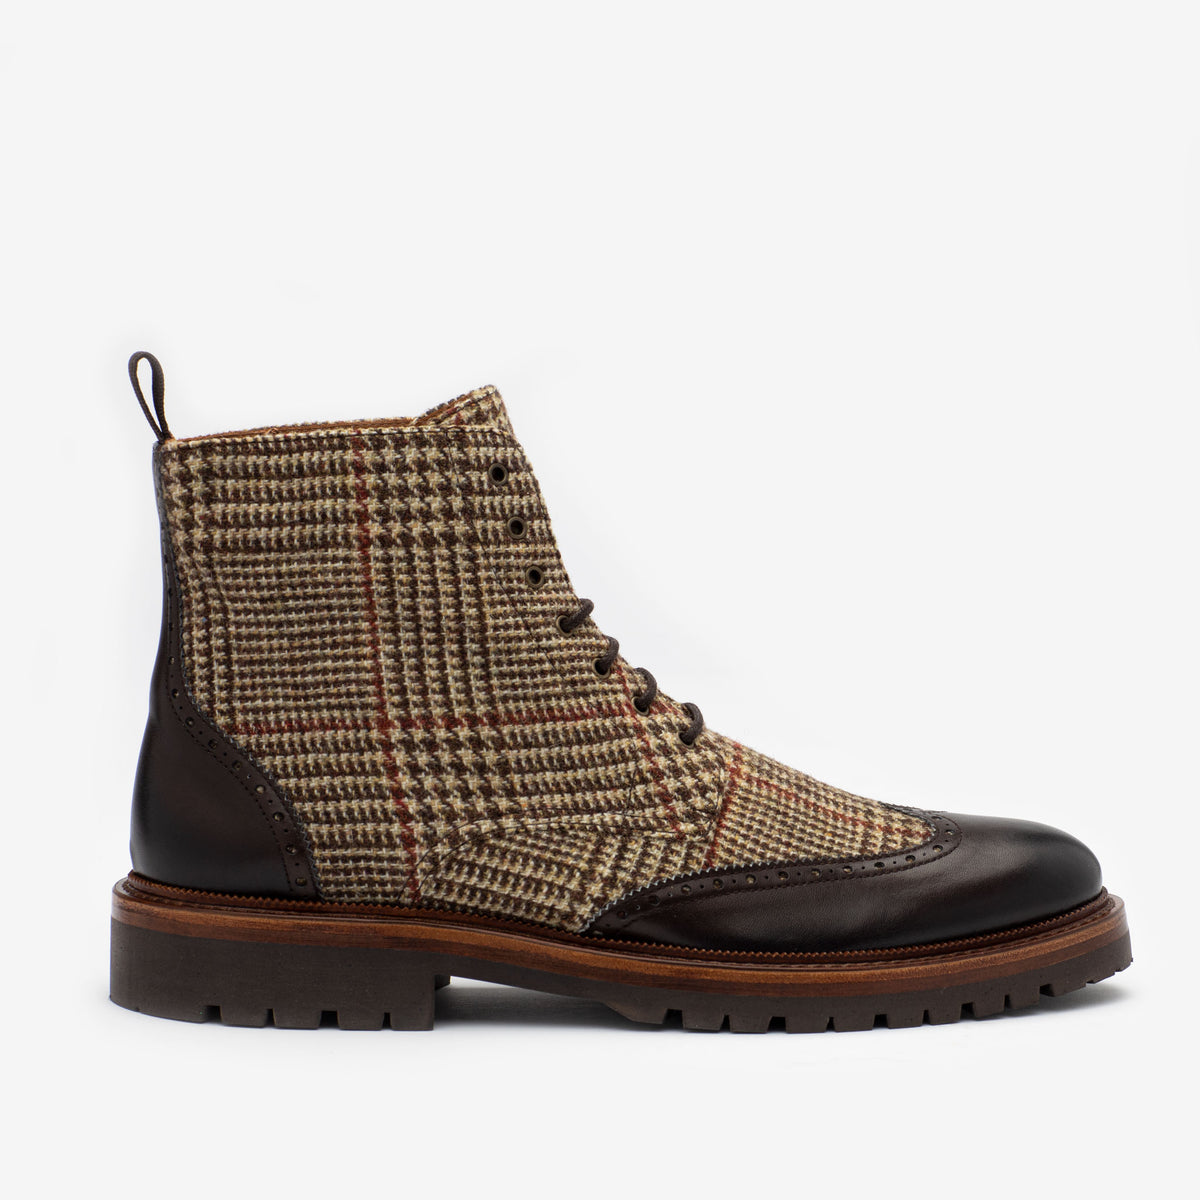 The Livingston Boot in Plaid